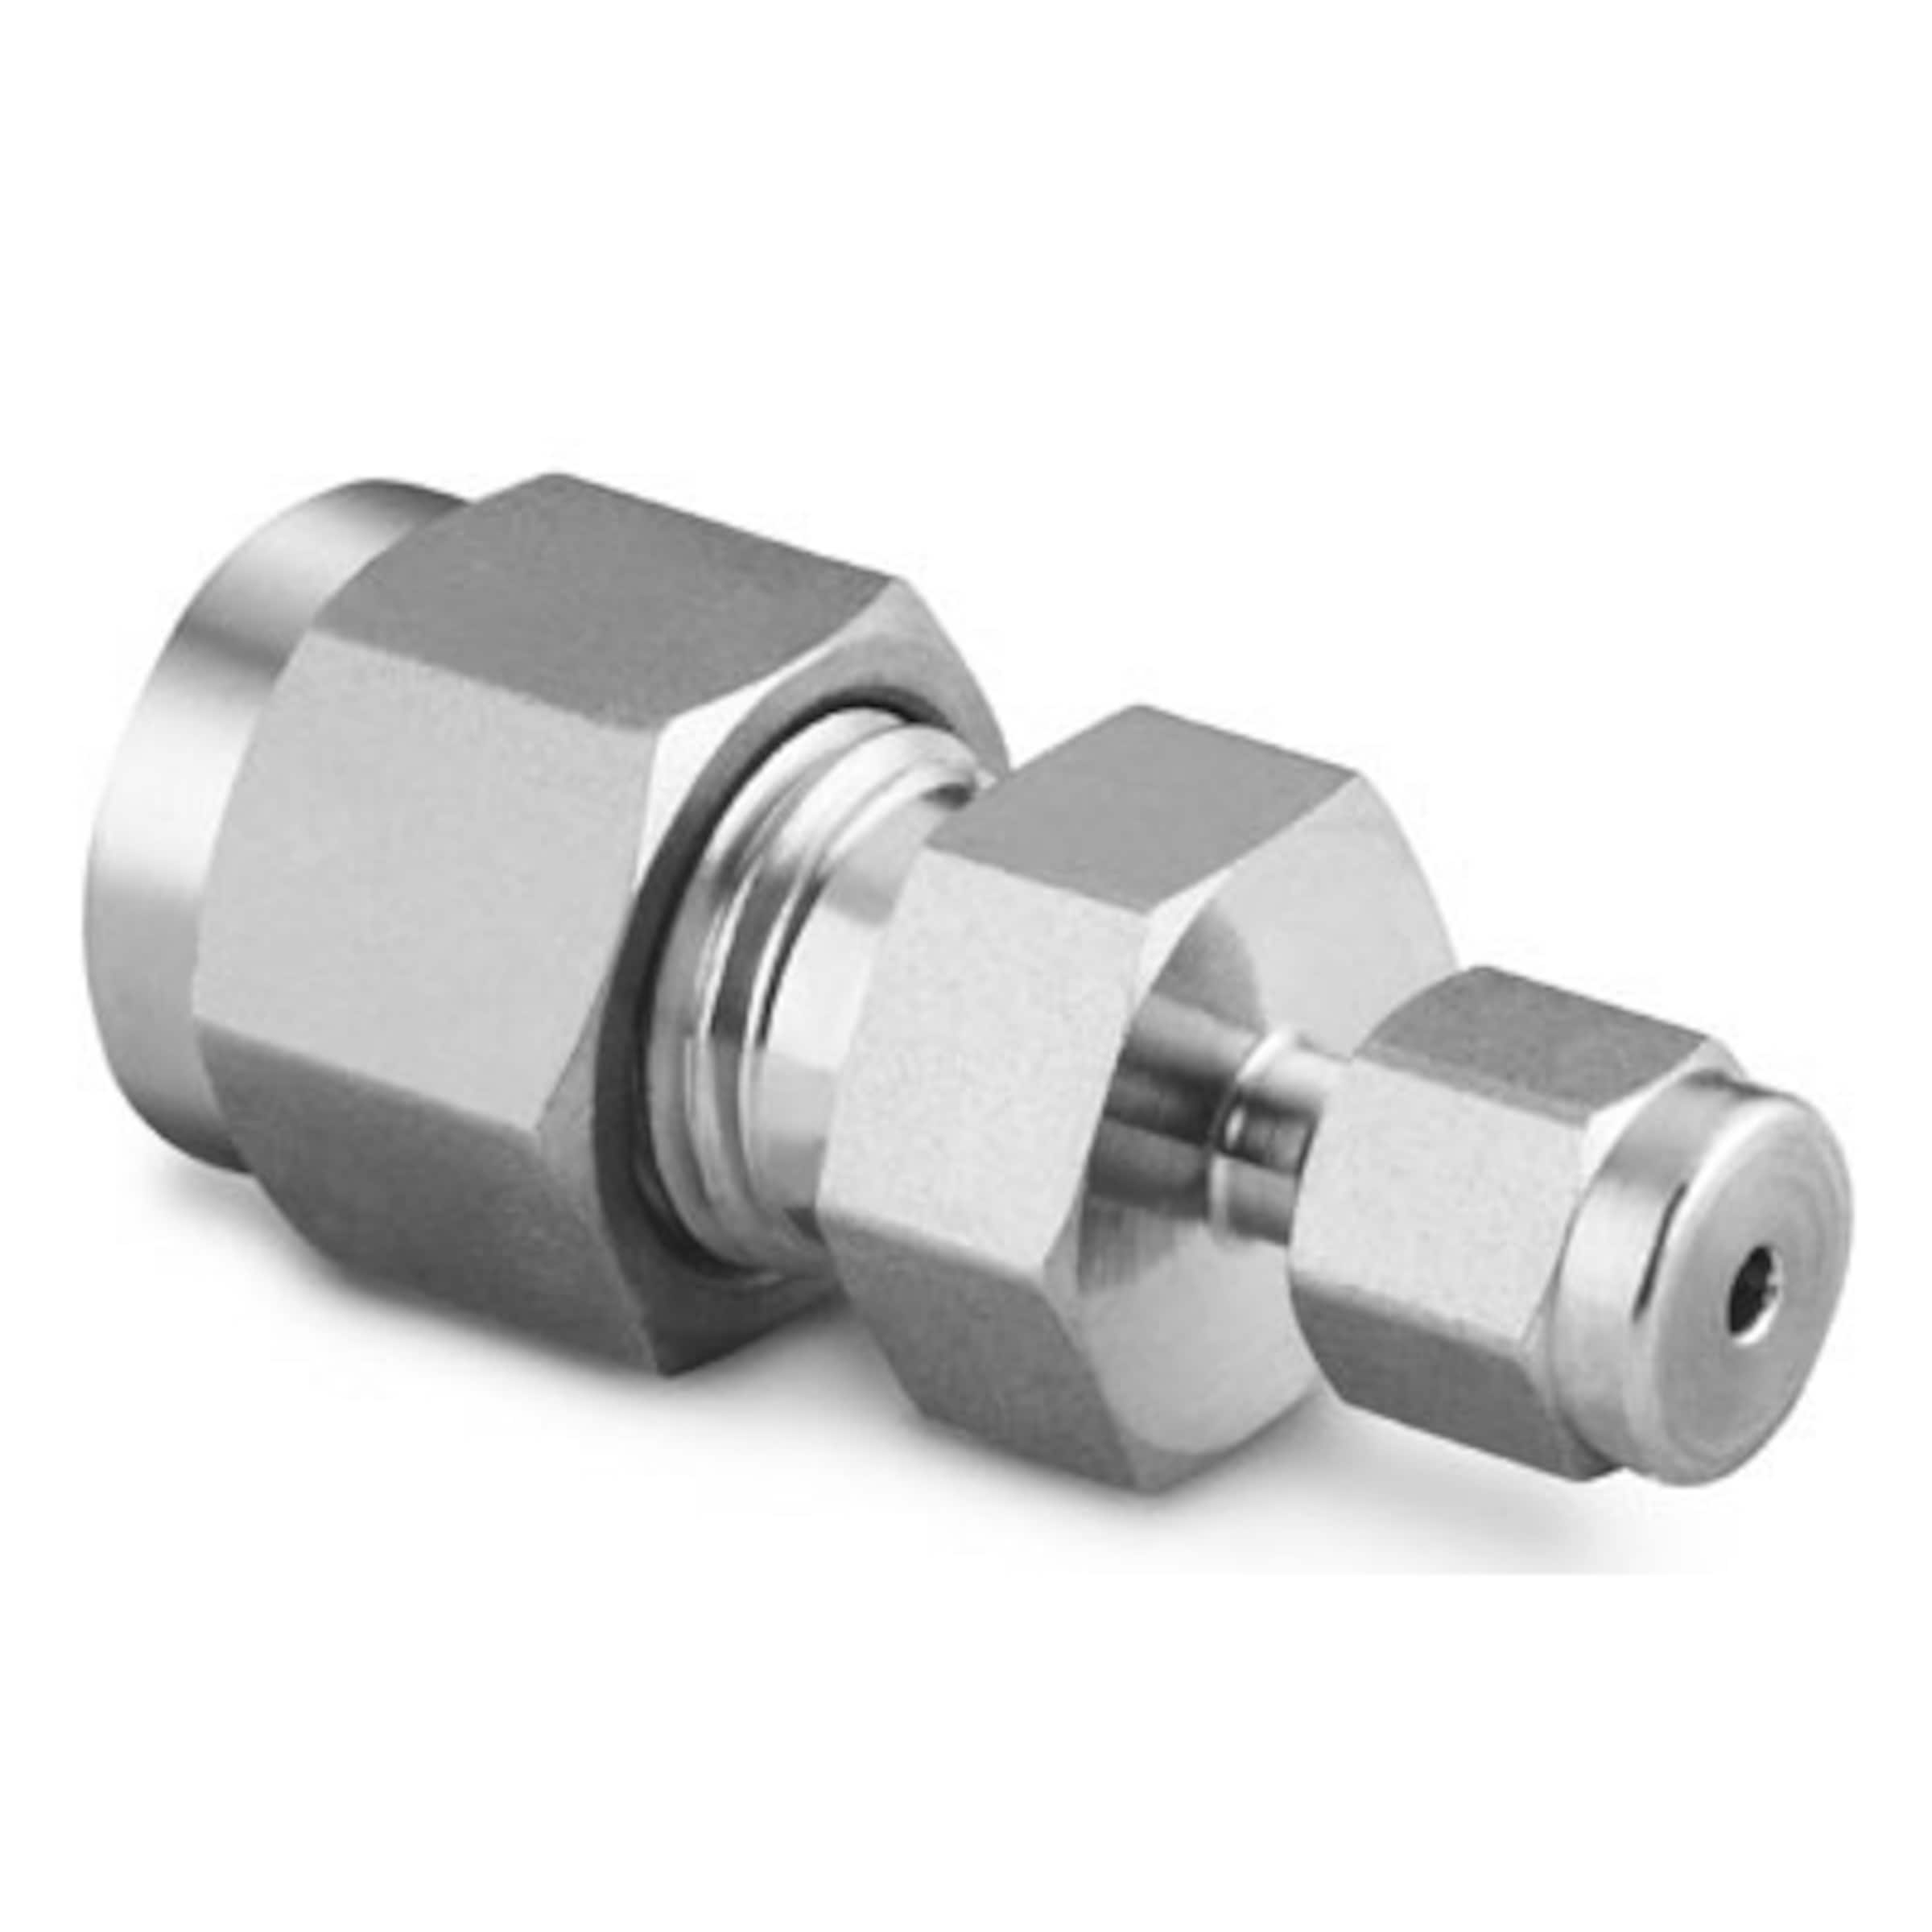 Stainless Steel Swagelok Tube Fitting, Female Connector,, 42% OFF